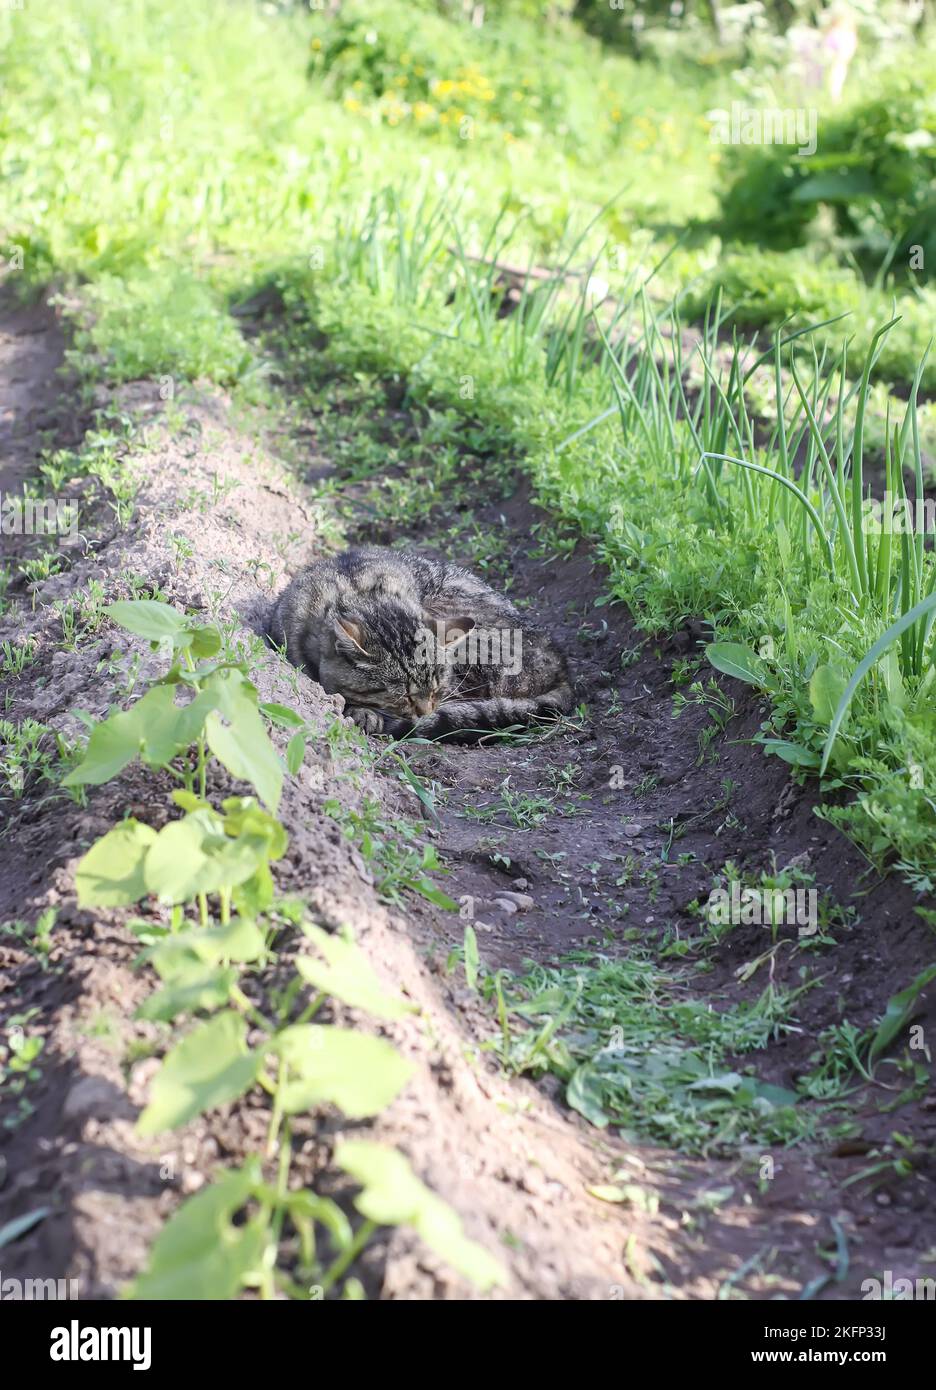 Cat sleeping on the ground in the vegetable garden Stock Photo